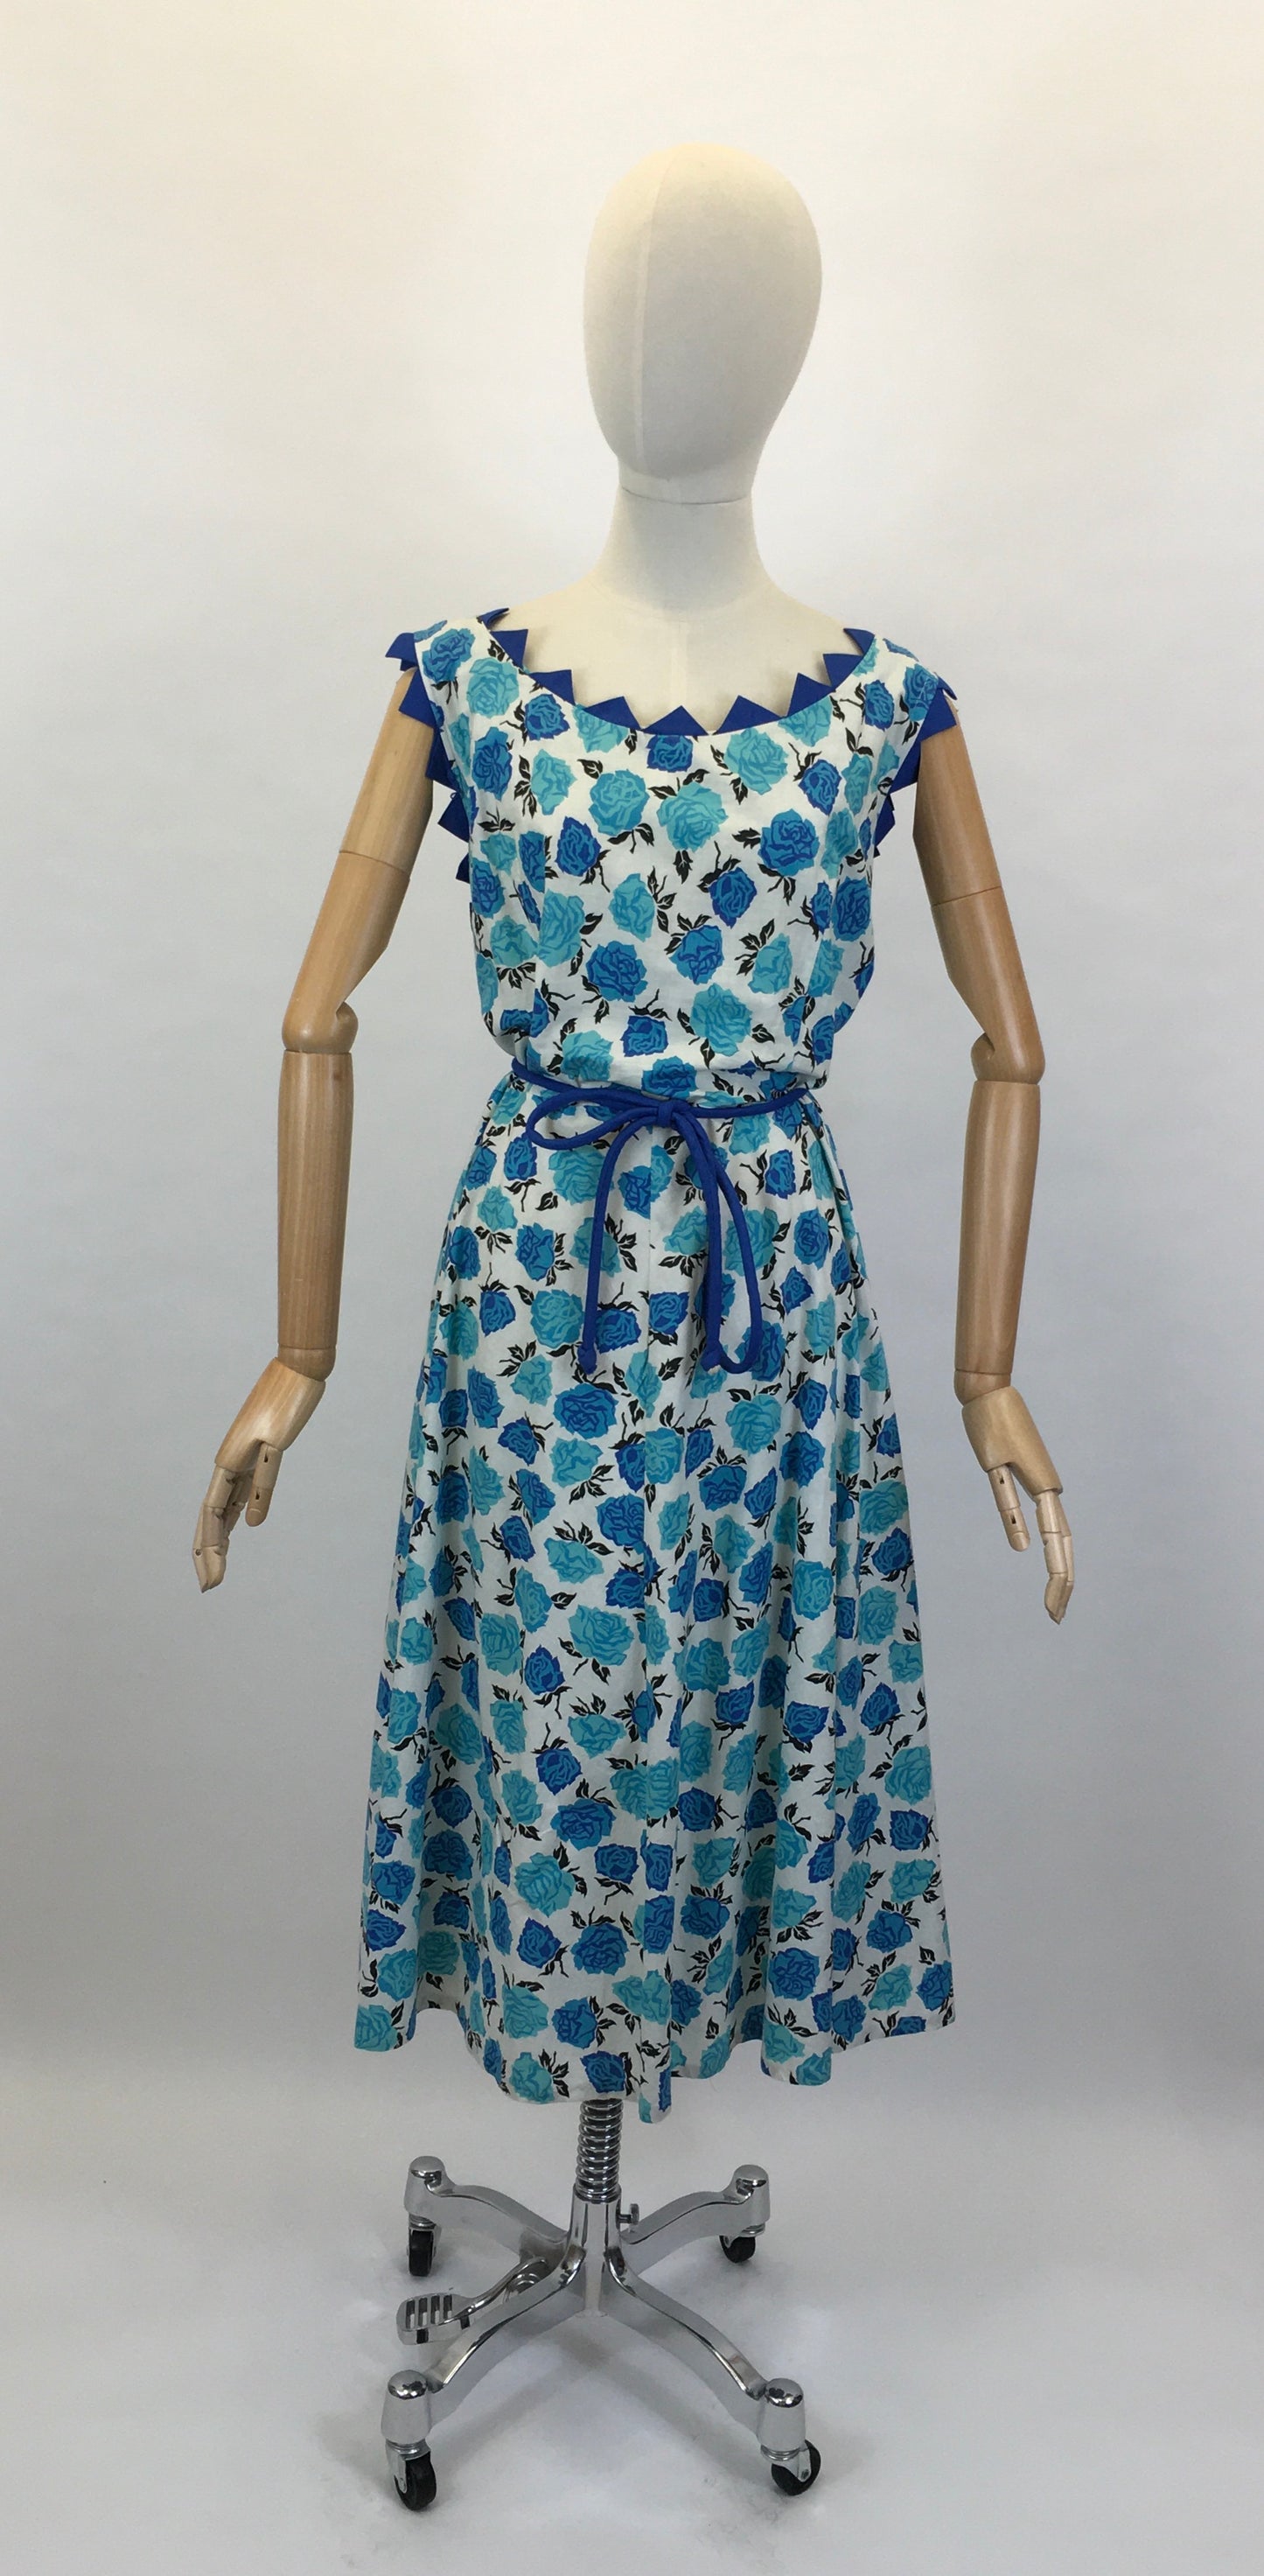 Original 1950’s VOLUP Cotton Day Dress - In A Stunning Blue Floral with Contrast Detailing